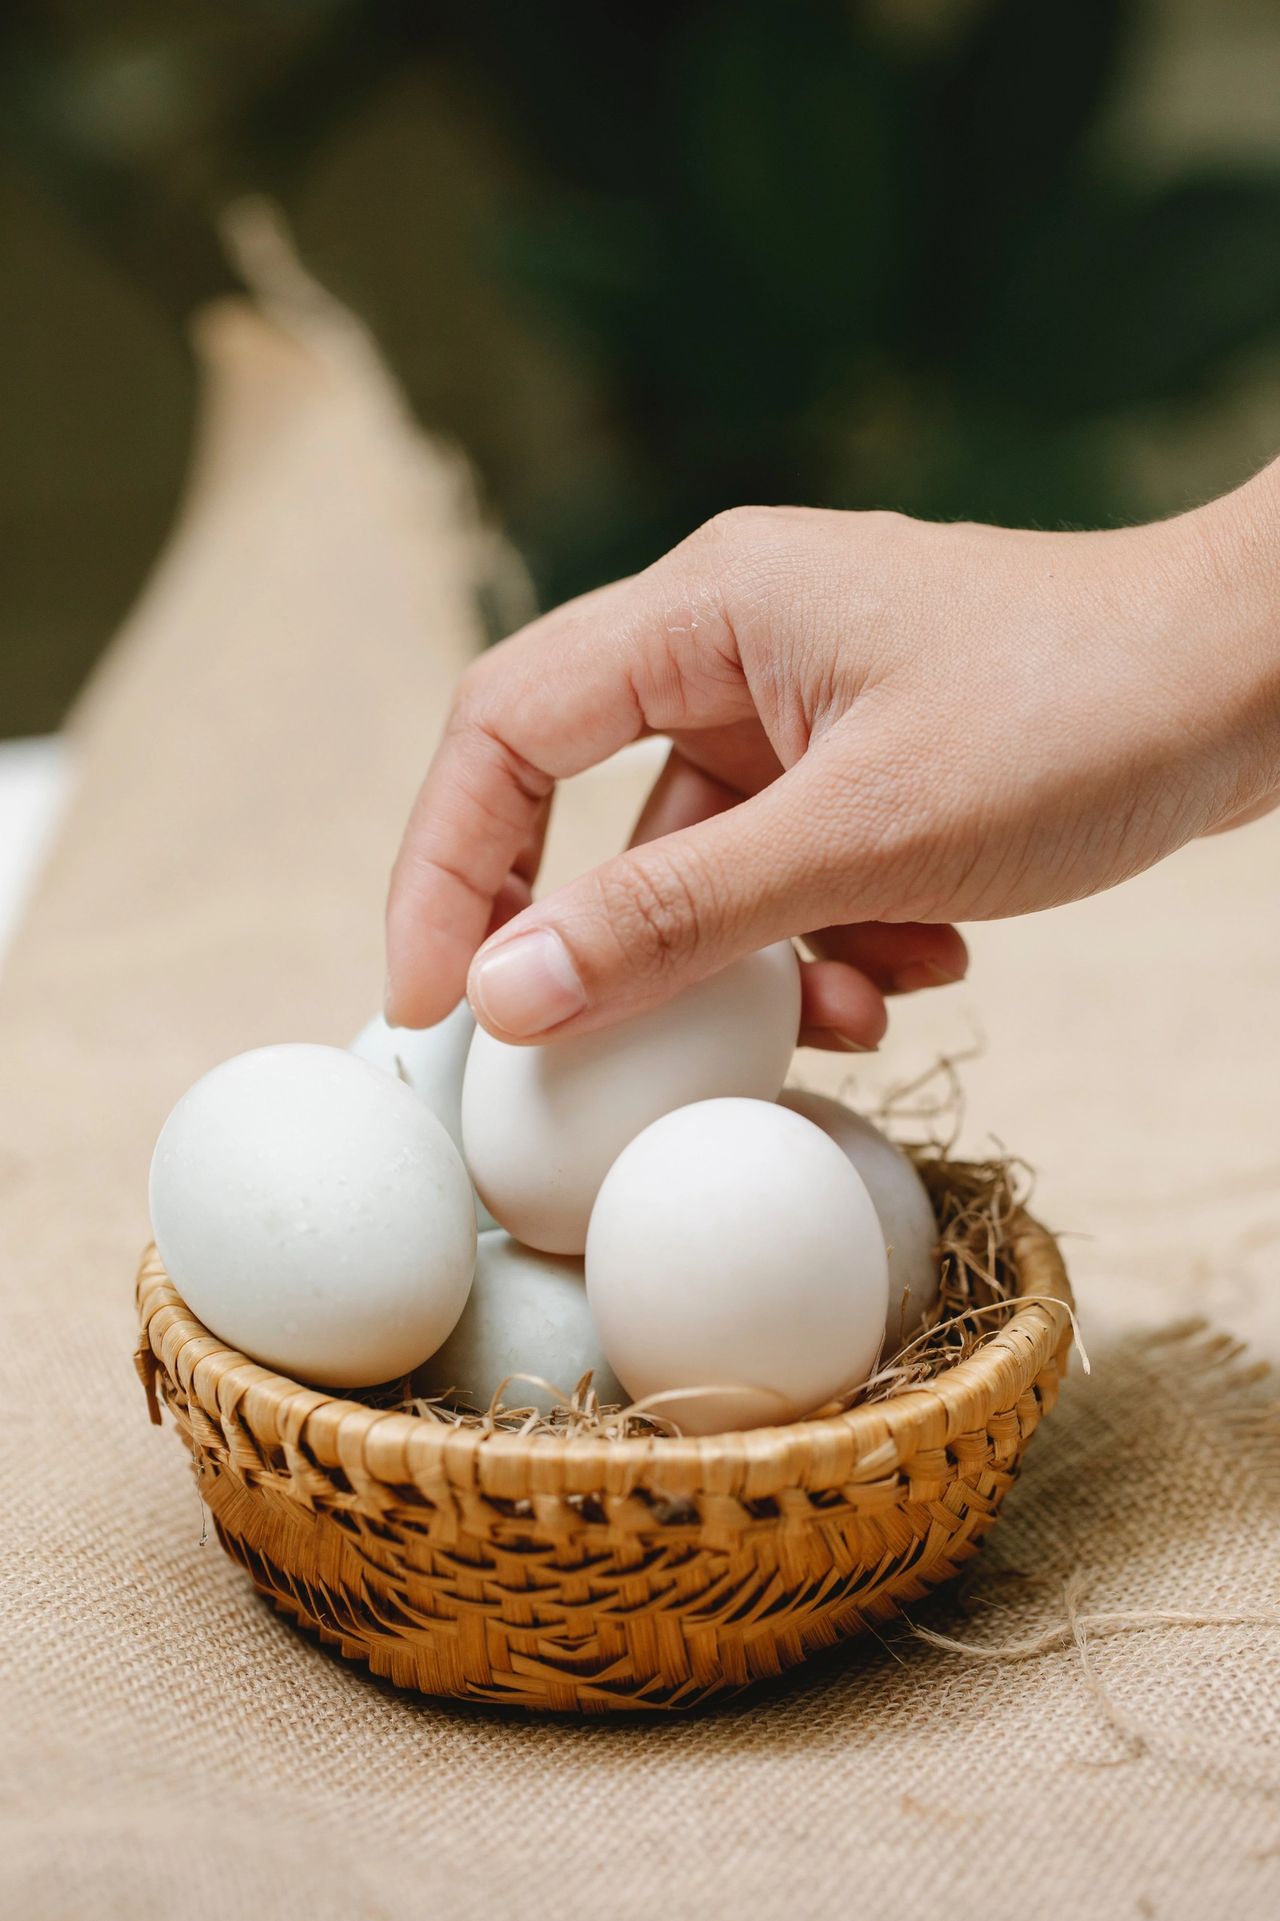 Pullet eggs: everything you need to know about the tiny 'waste' eggs now on  shop shelves, Eggs